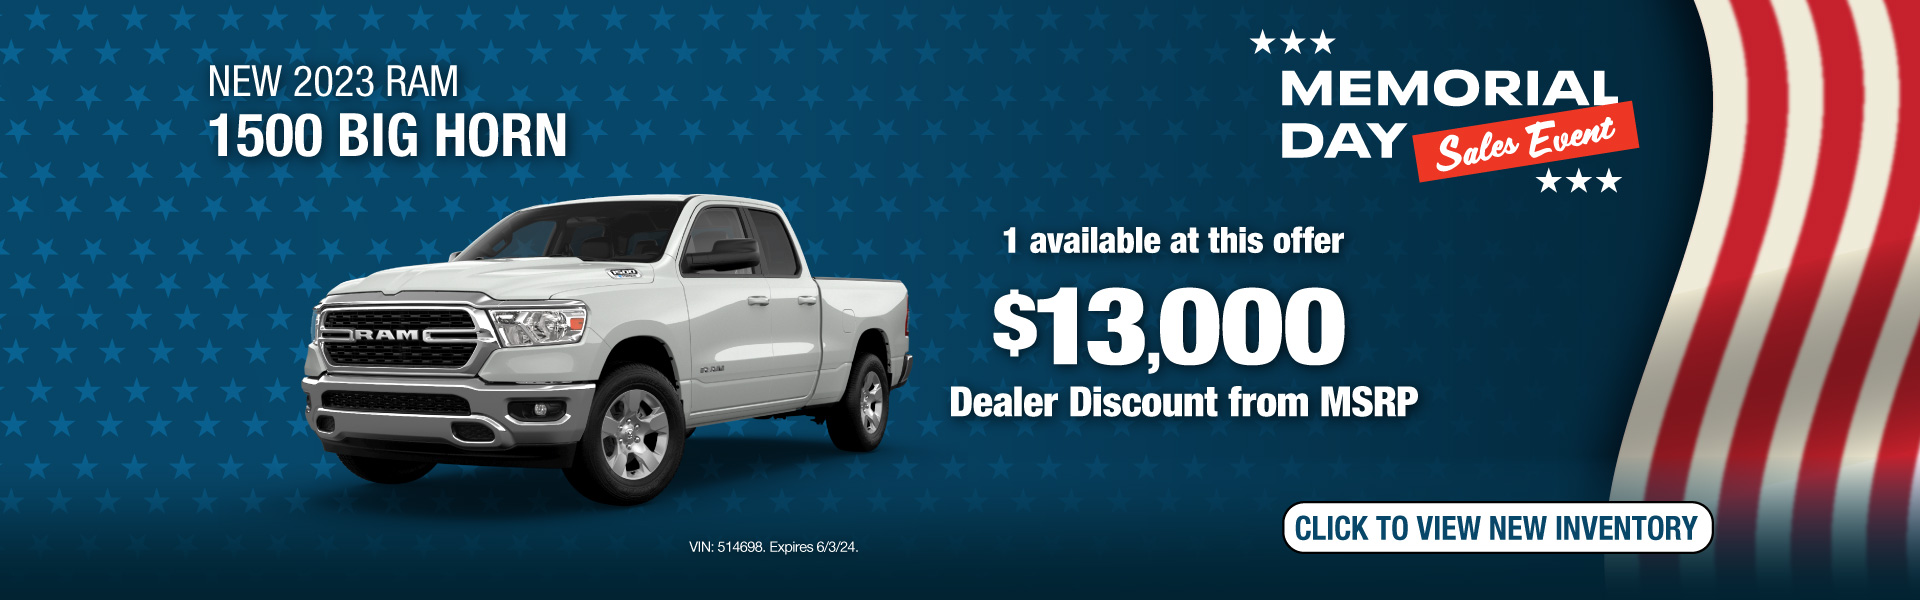 Get a New 2023 RAM 1500 Big Horn for $13,000 Dealer Discount from MSRP. Expires 6/3/24.